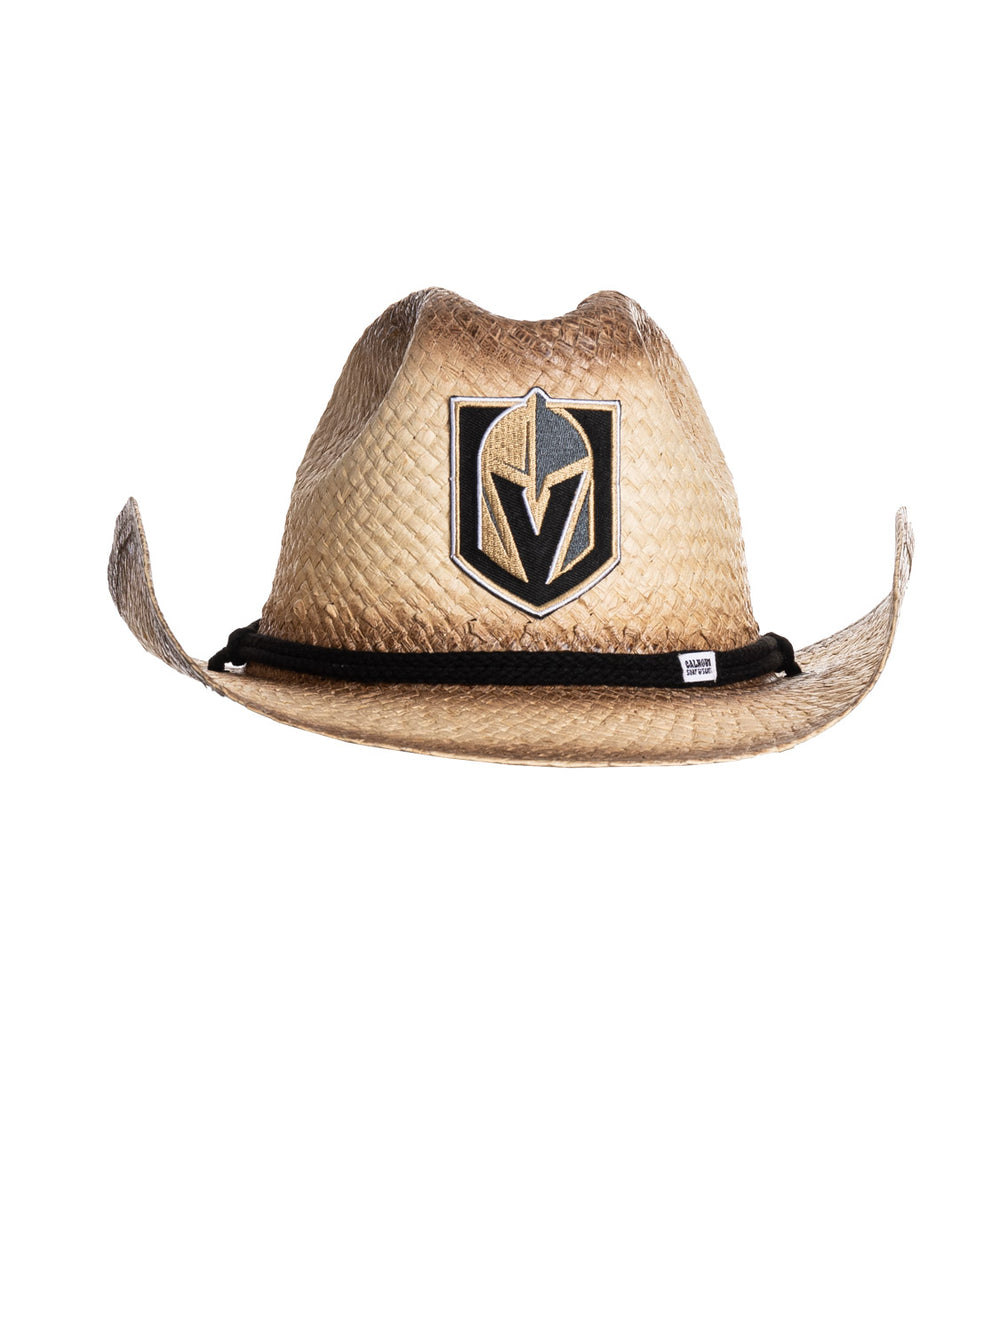 The front of the Vegas Golden Knights straw cowboy hat. It is a tan straw hat with the Golden Knights logo in the centre of it, with a black rope running along the crown of the hat.